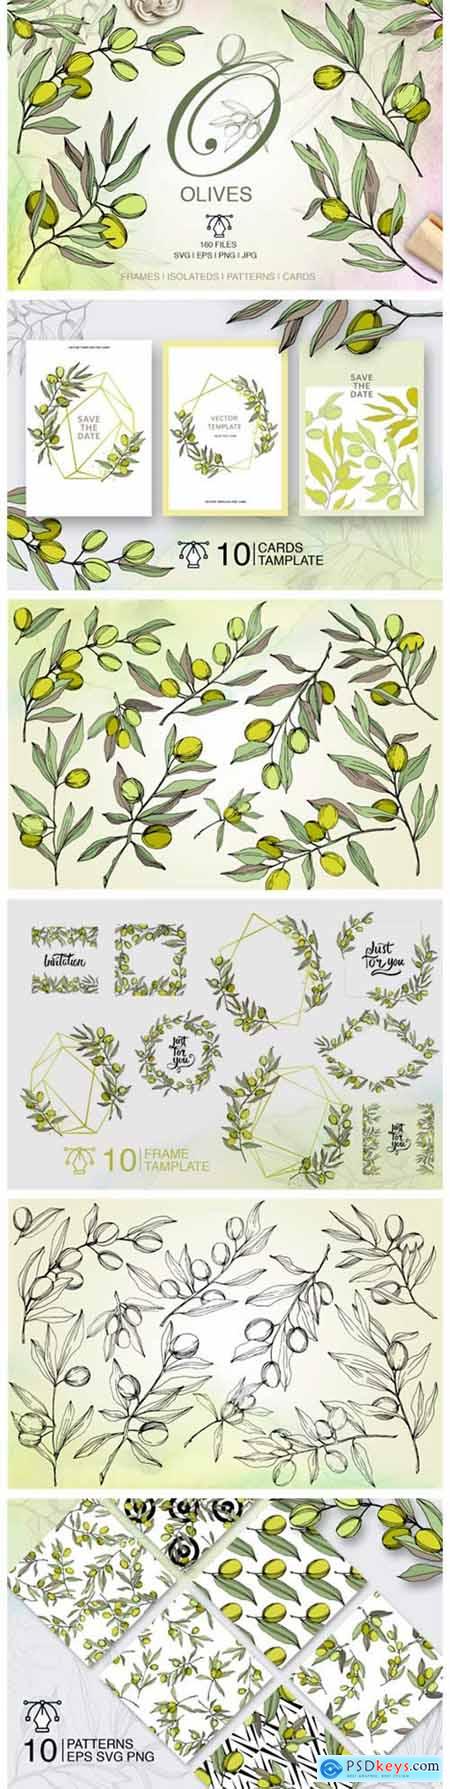 Olives Vector Watercolor Set 4751969